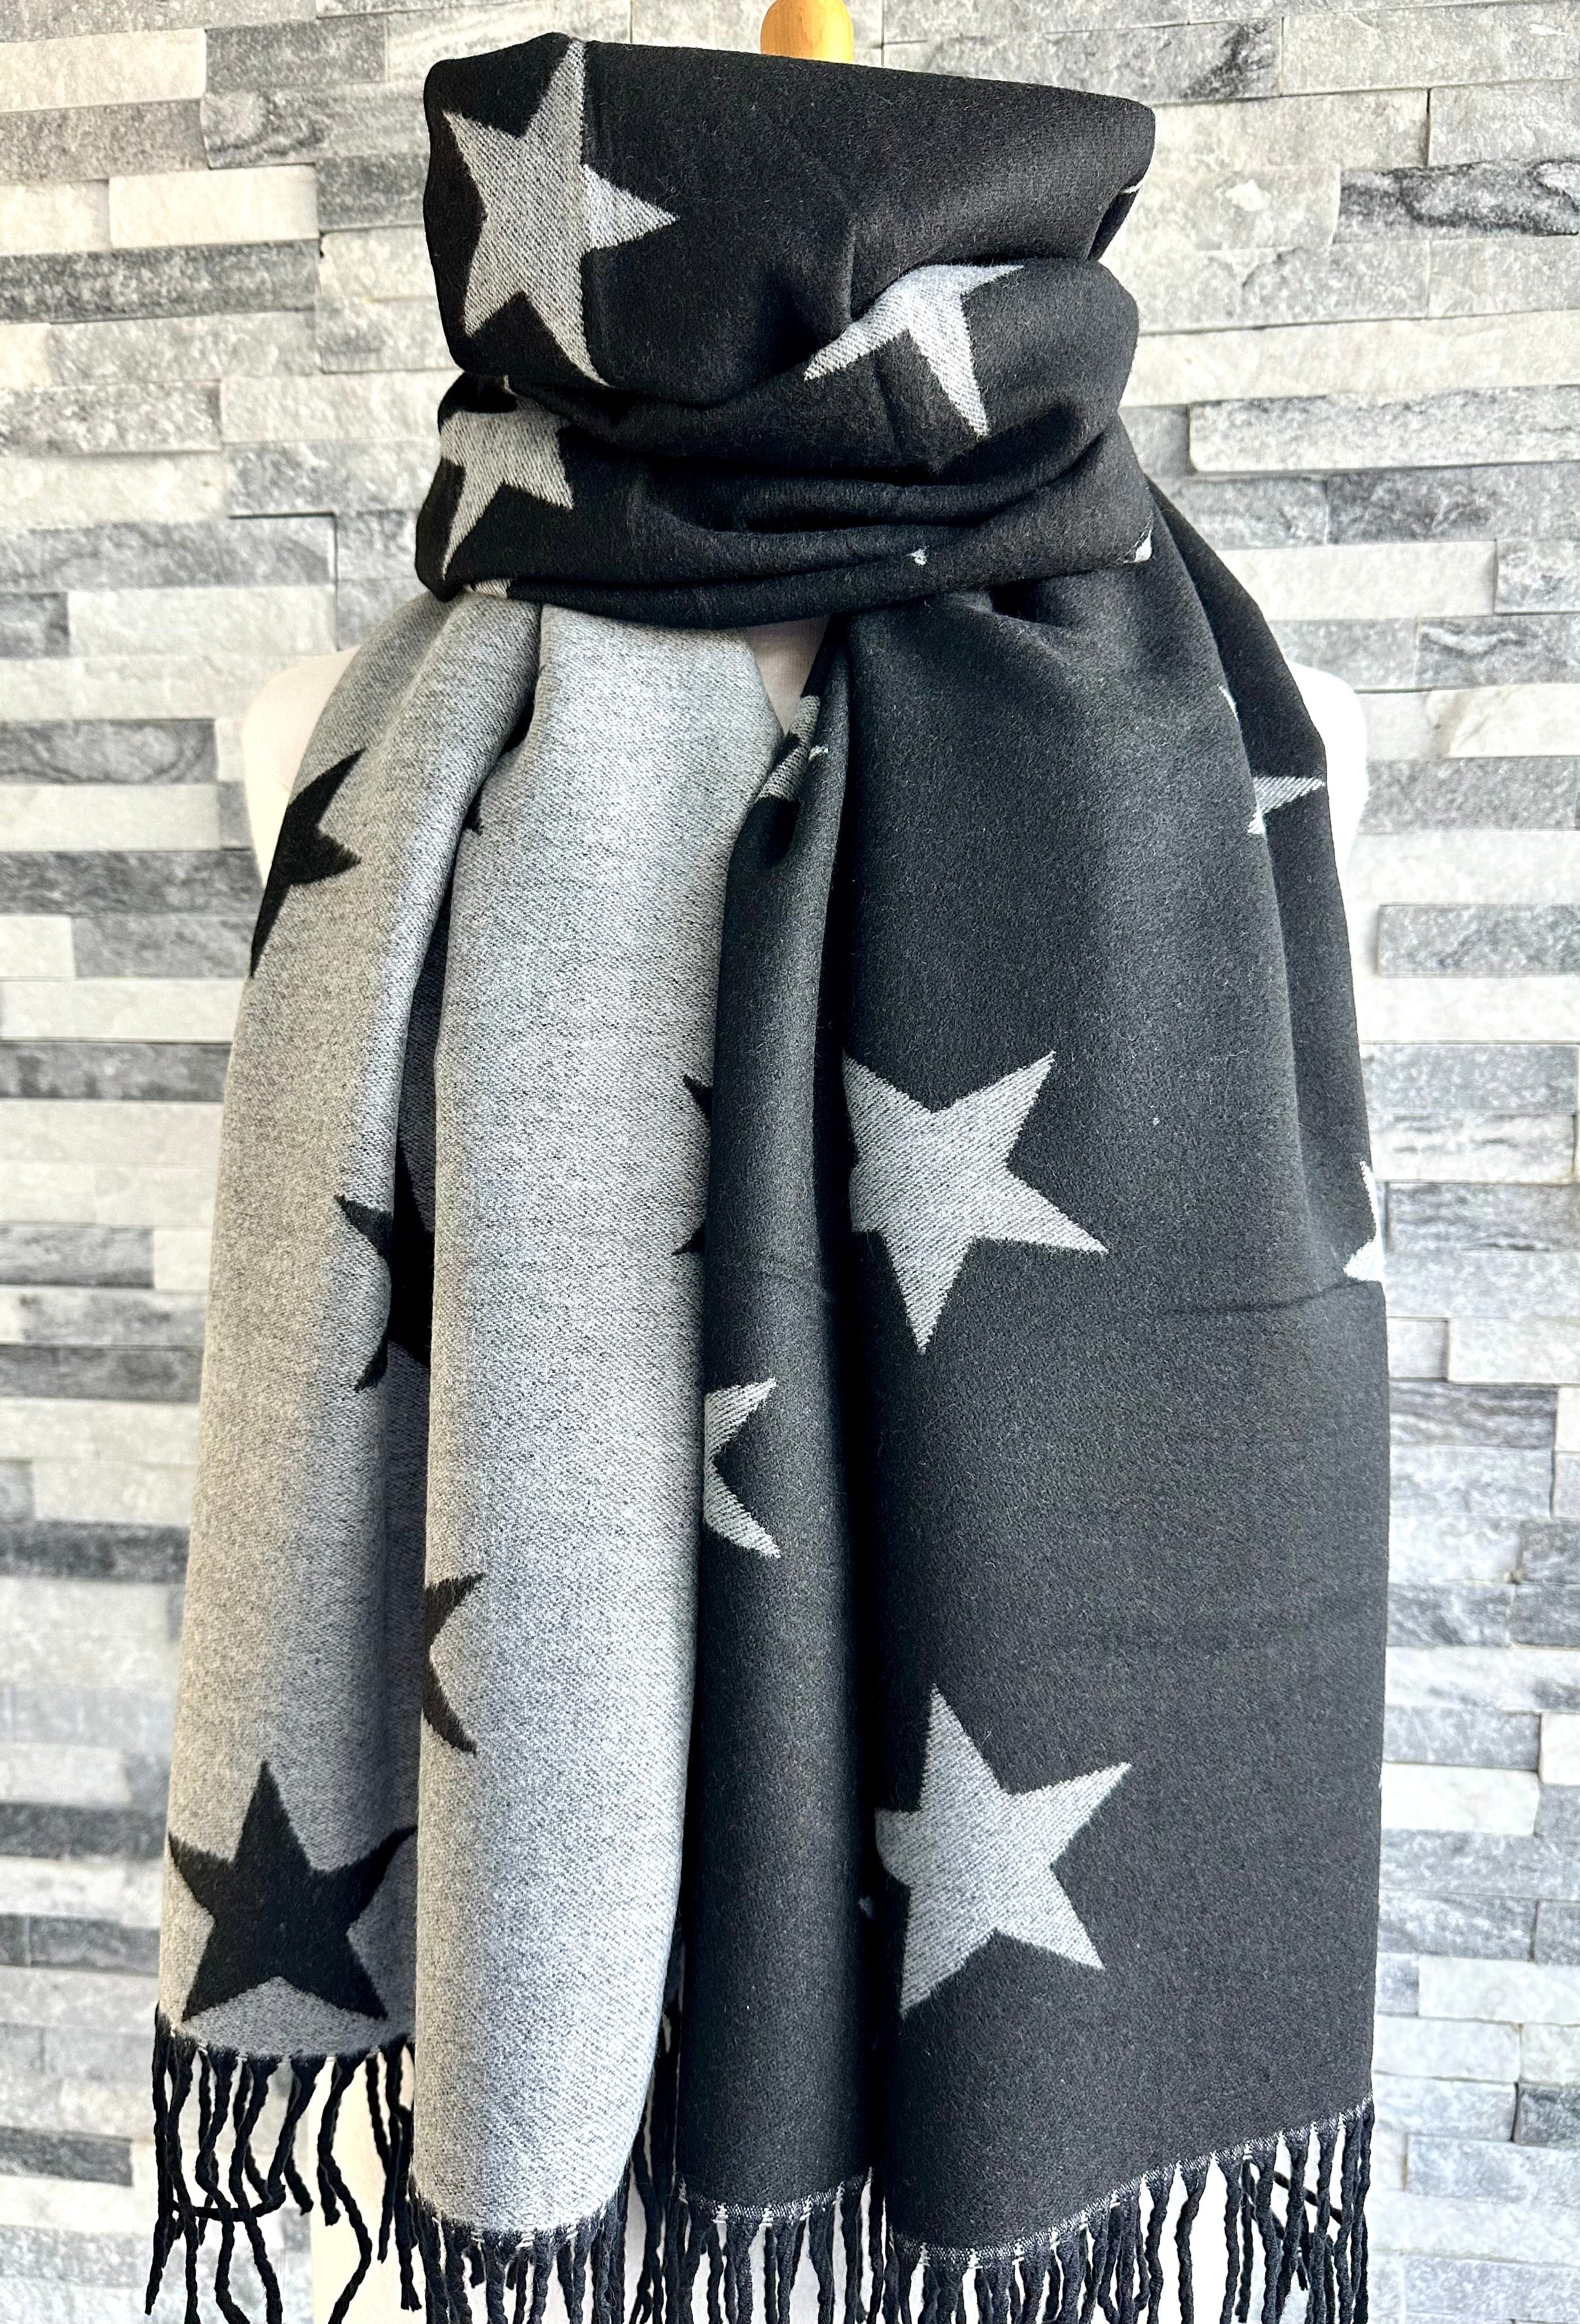 lusciousscarves Reversible Black and Grey Stars Scarf/Shawl Cashmere Blend